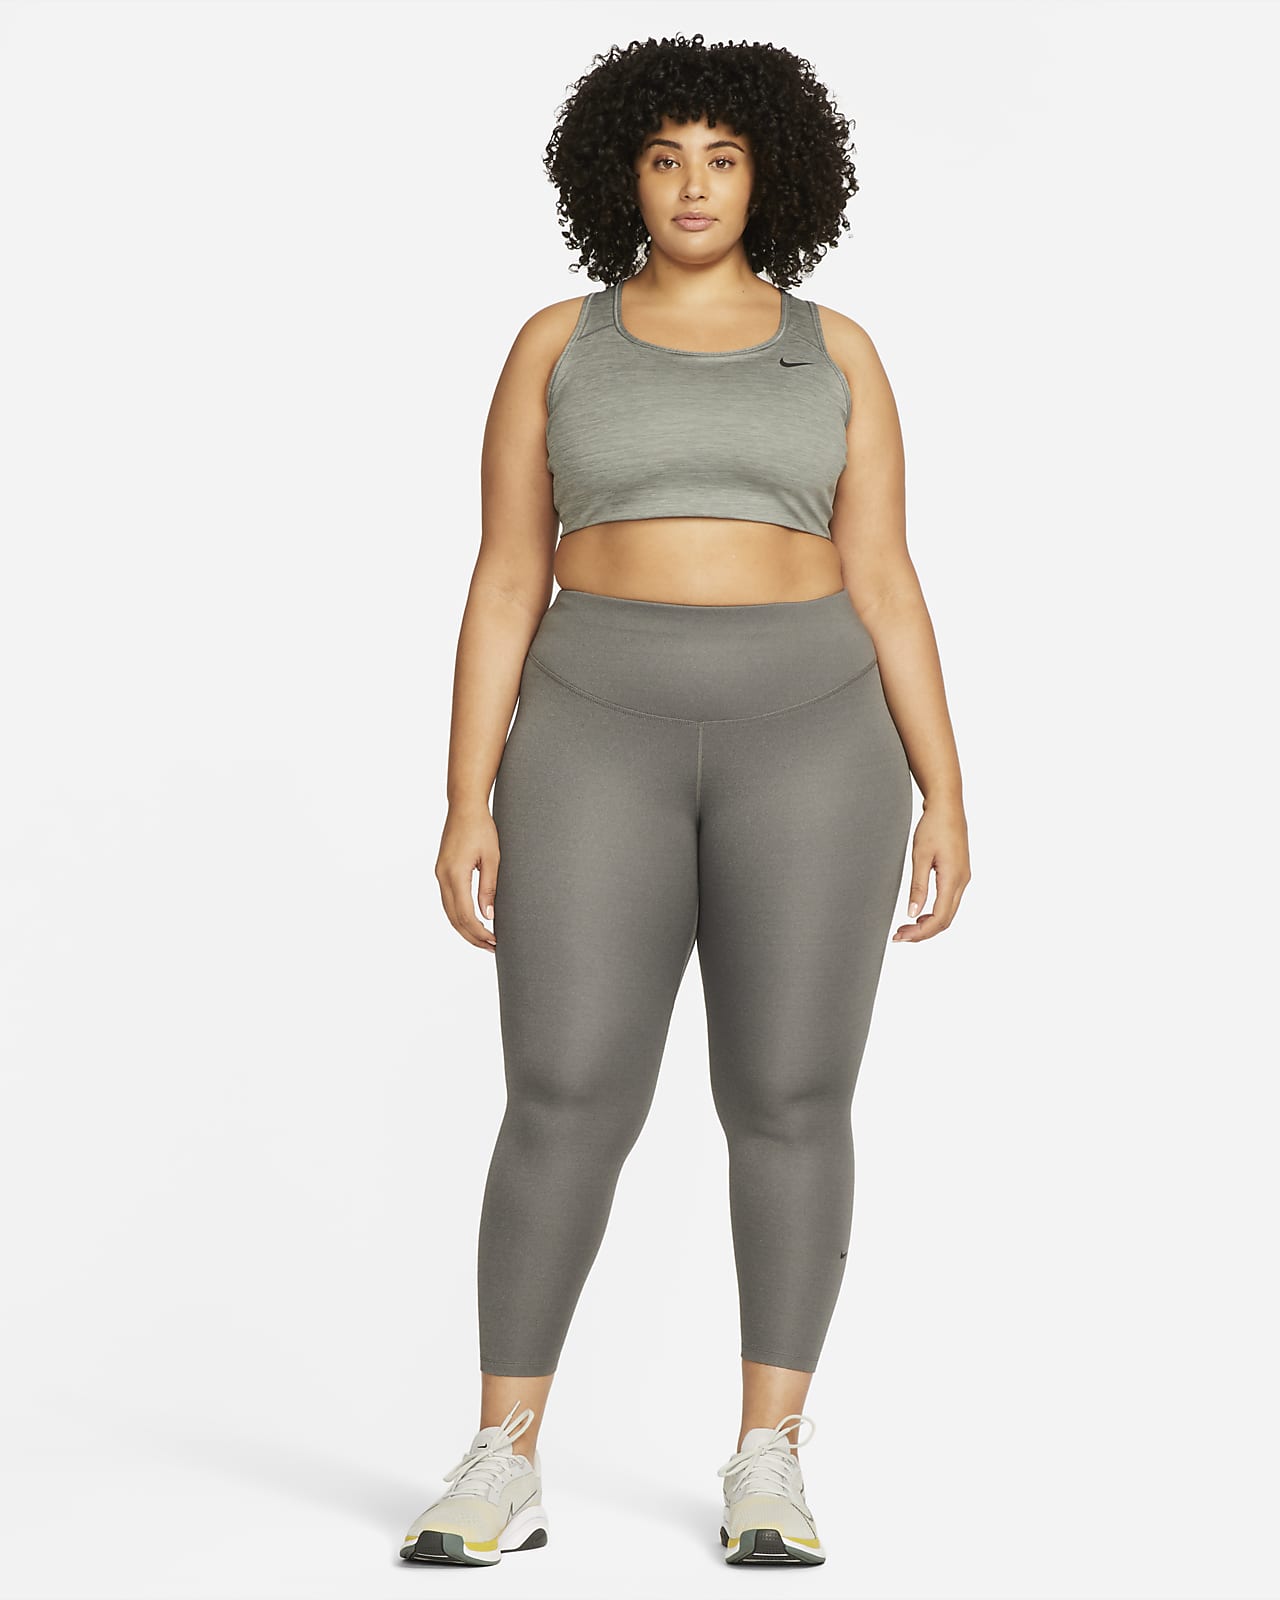 Shop Women's Plus Size Leggings from Nike up to 75% Off